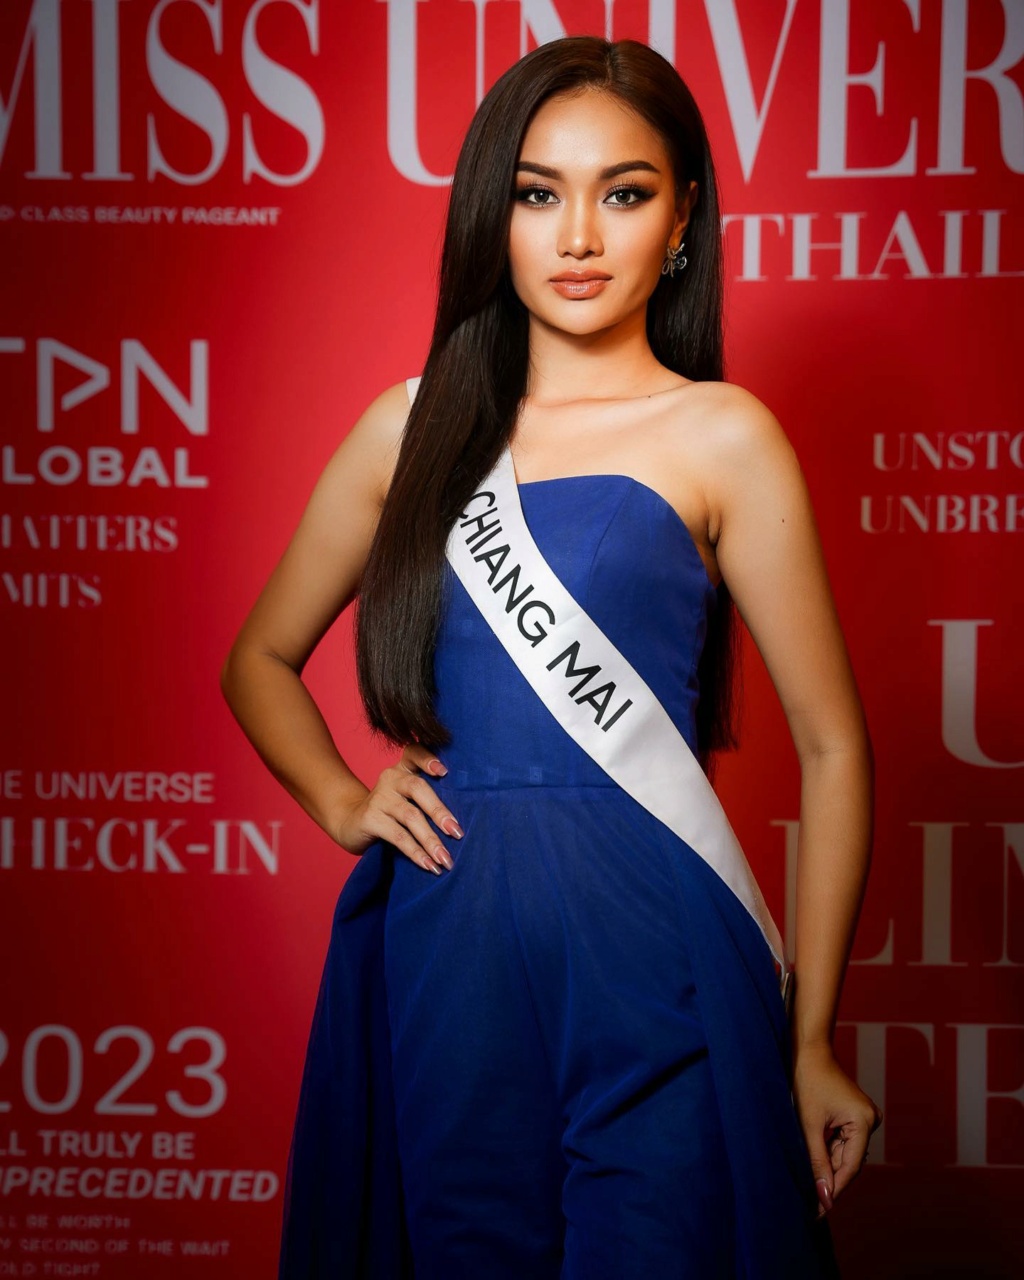 Road to MISS UNIVERSE THAILAND 2023 - Page 6 Ins11390